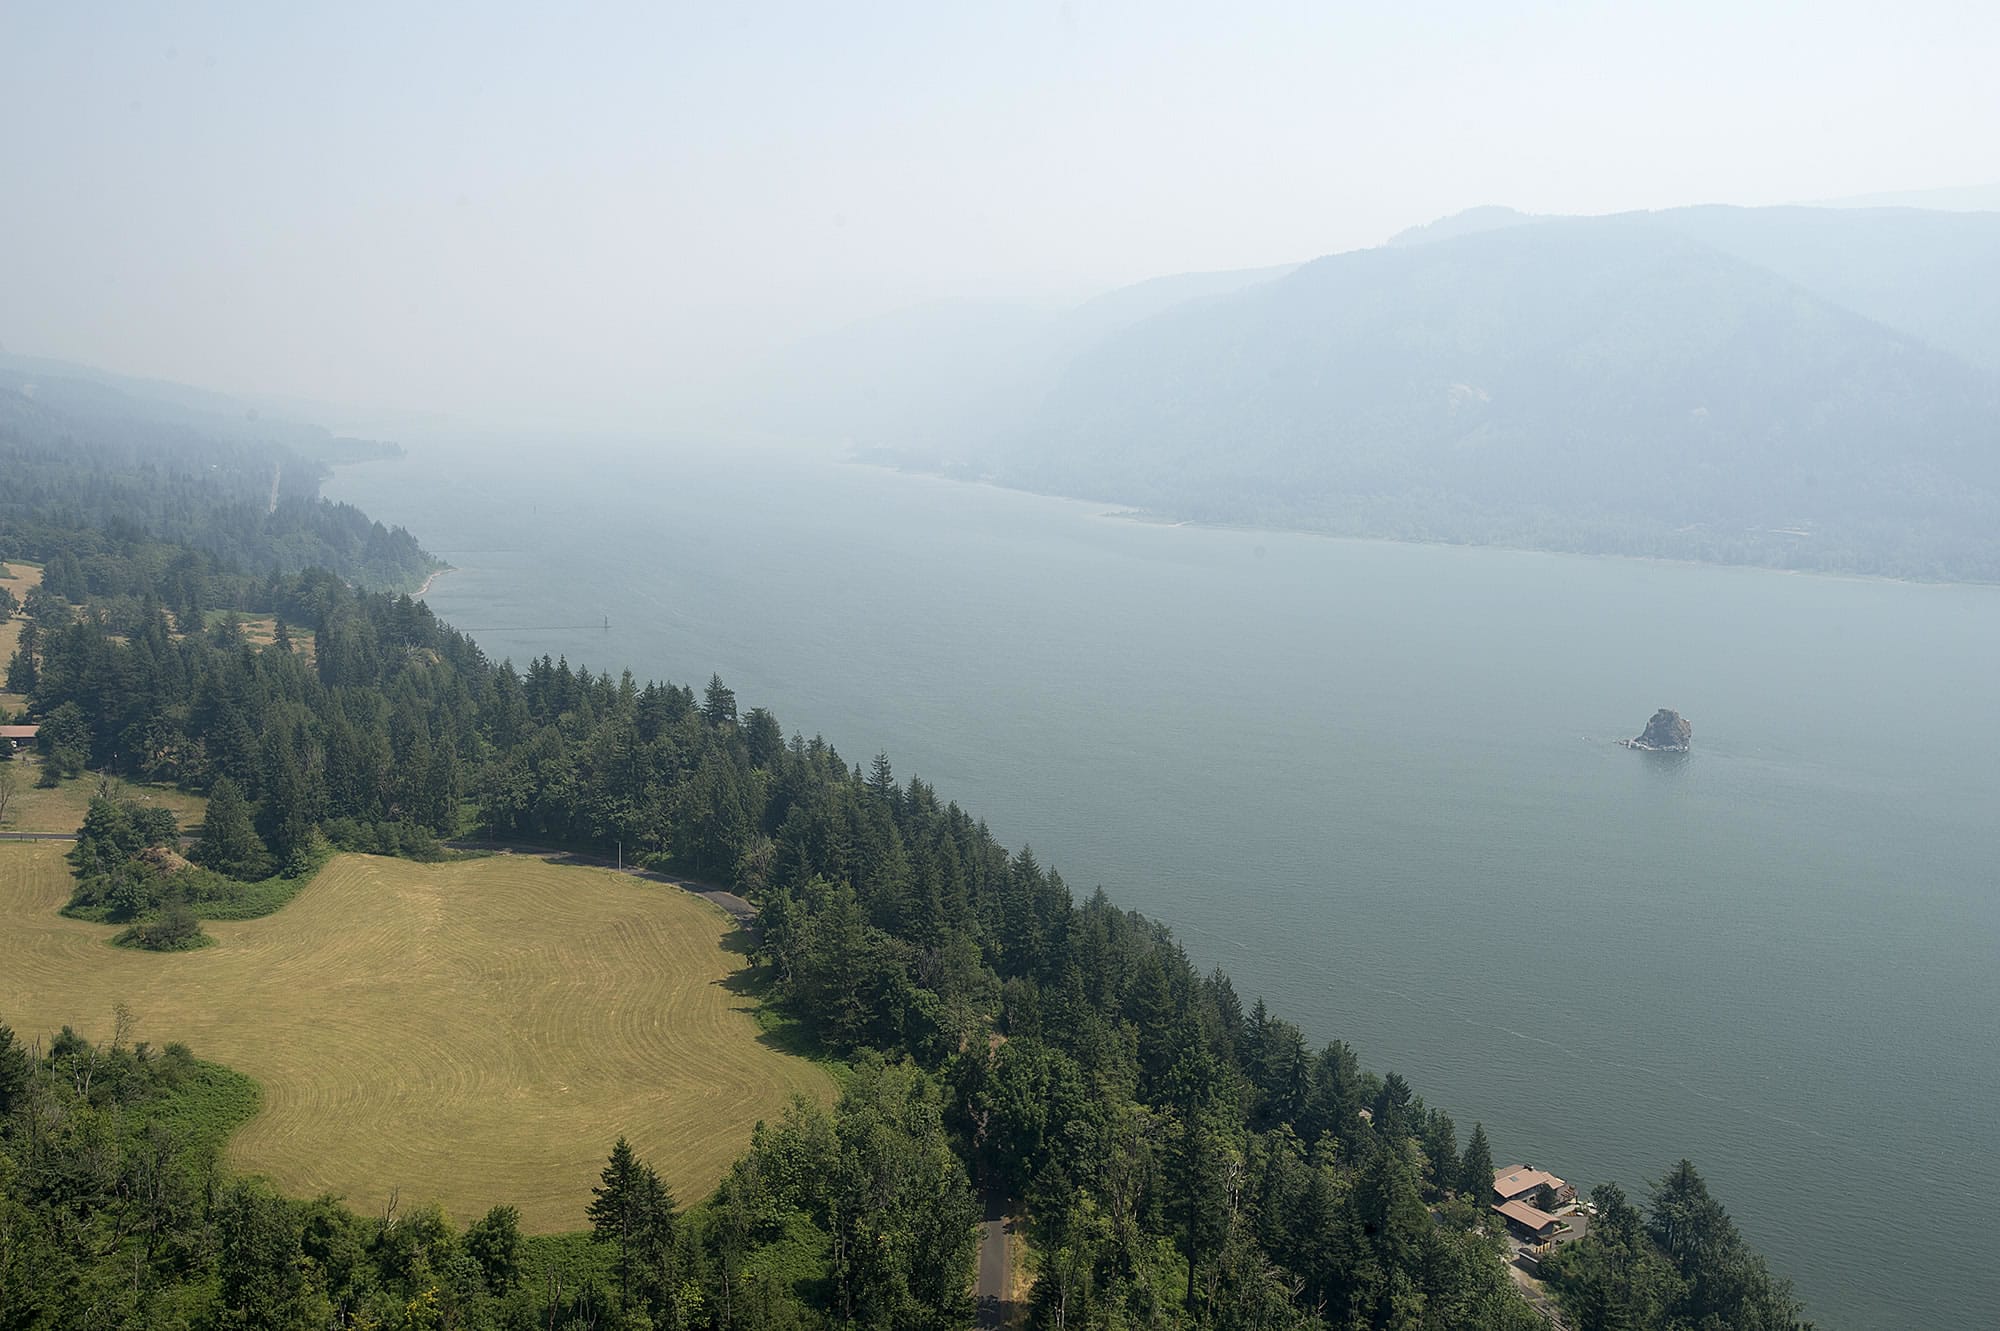 A thick haze obstructs the scenic view of the Columbia River Gorge from the Highway 14 Cape Horn overlook east of Washougal on Wednesday afternoon, Aug. 2, 2017.